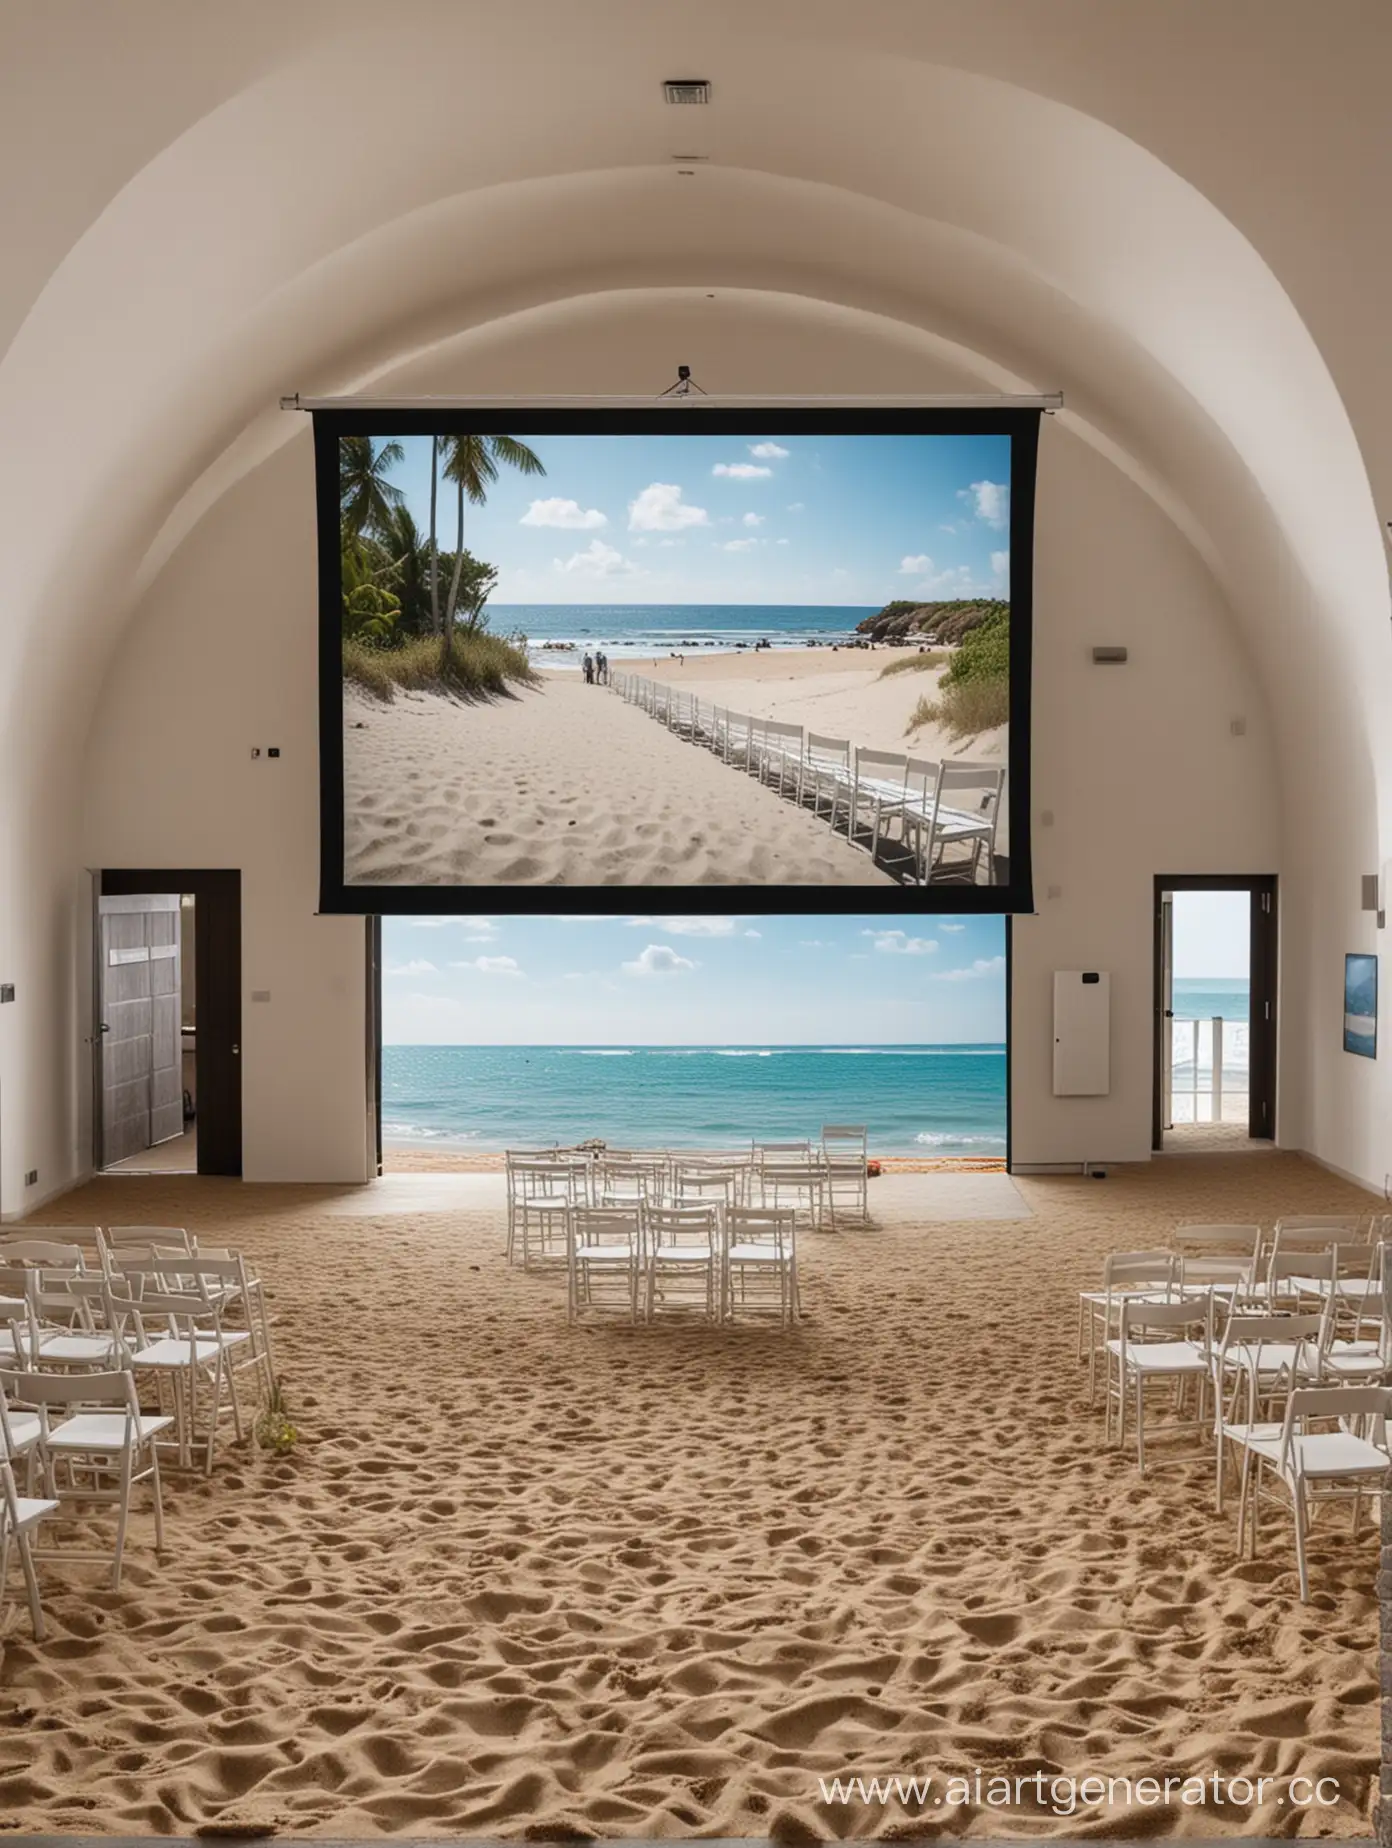 Presentation on a projector in a hall on the beach